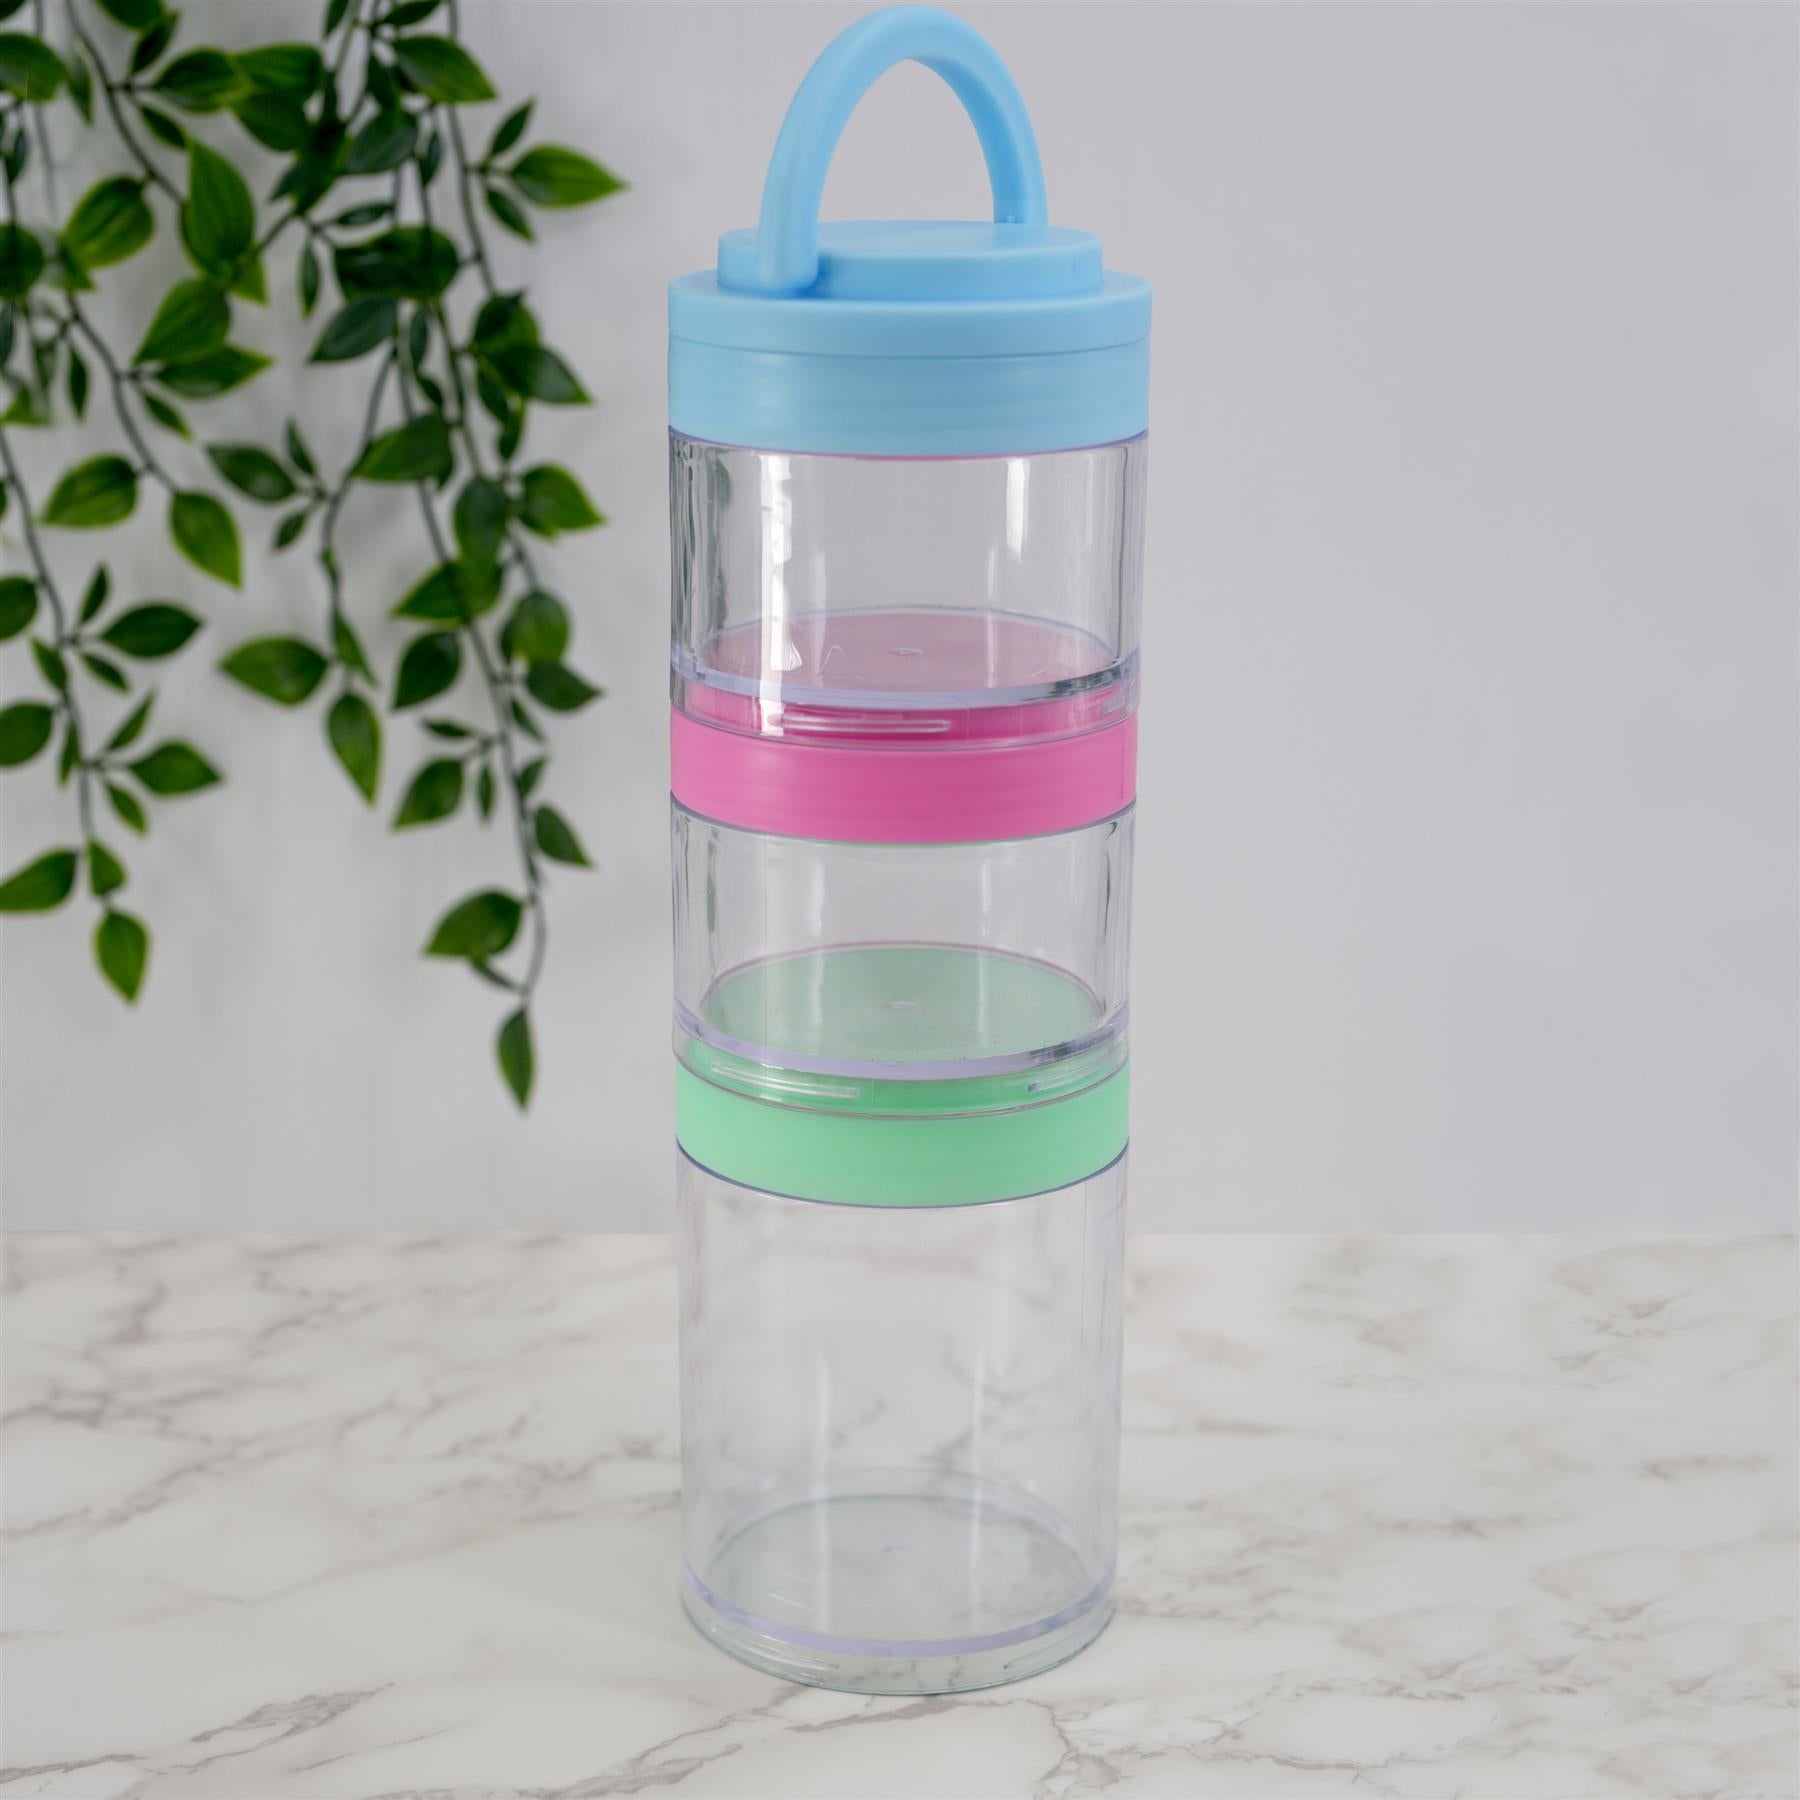 Geezy Snack Tower Stackable Tower Snack Food Container